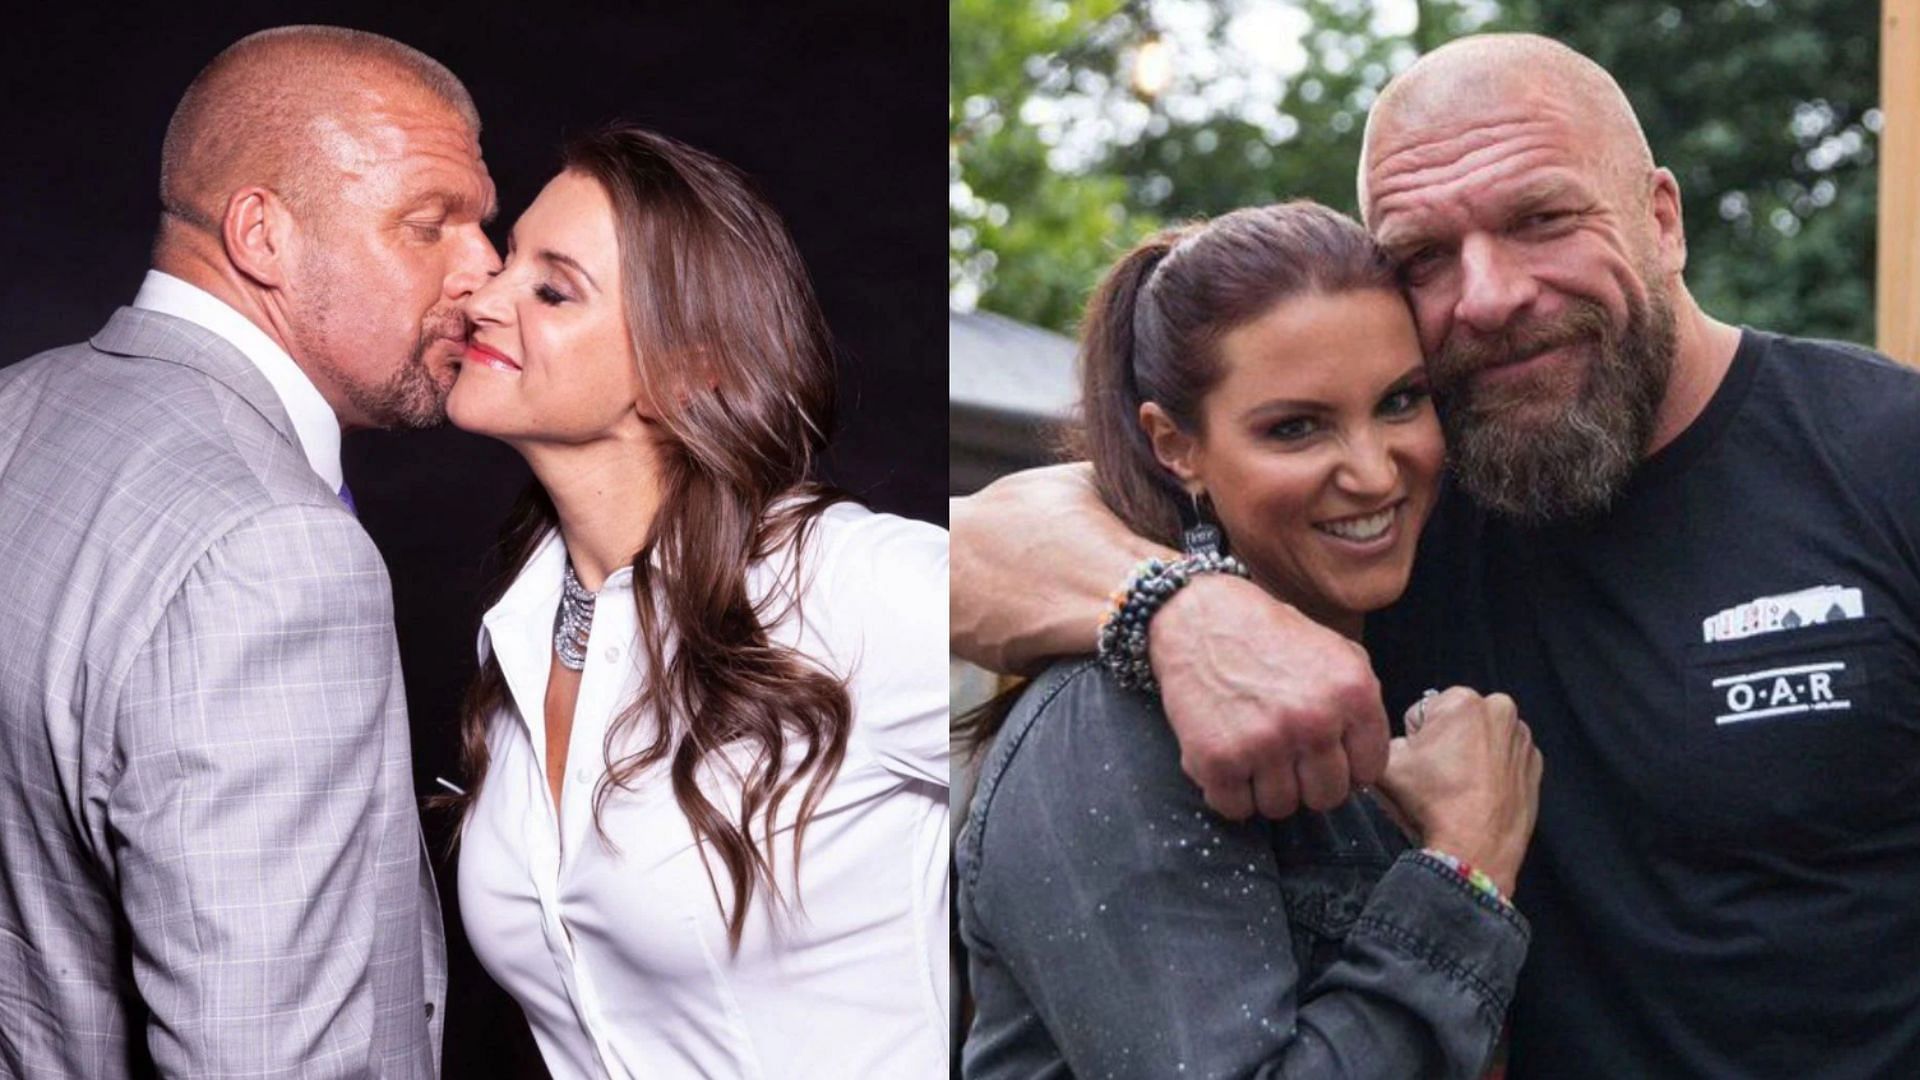 Stephanie McMahon and Triple H are the power couple in WWE